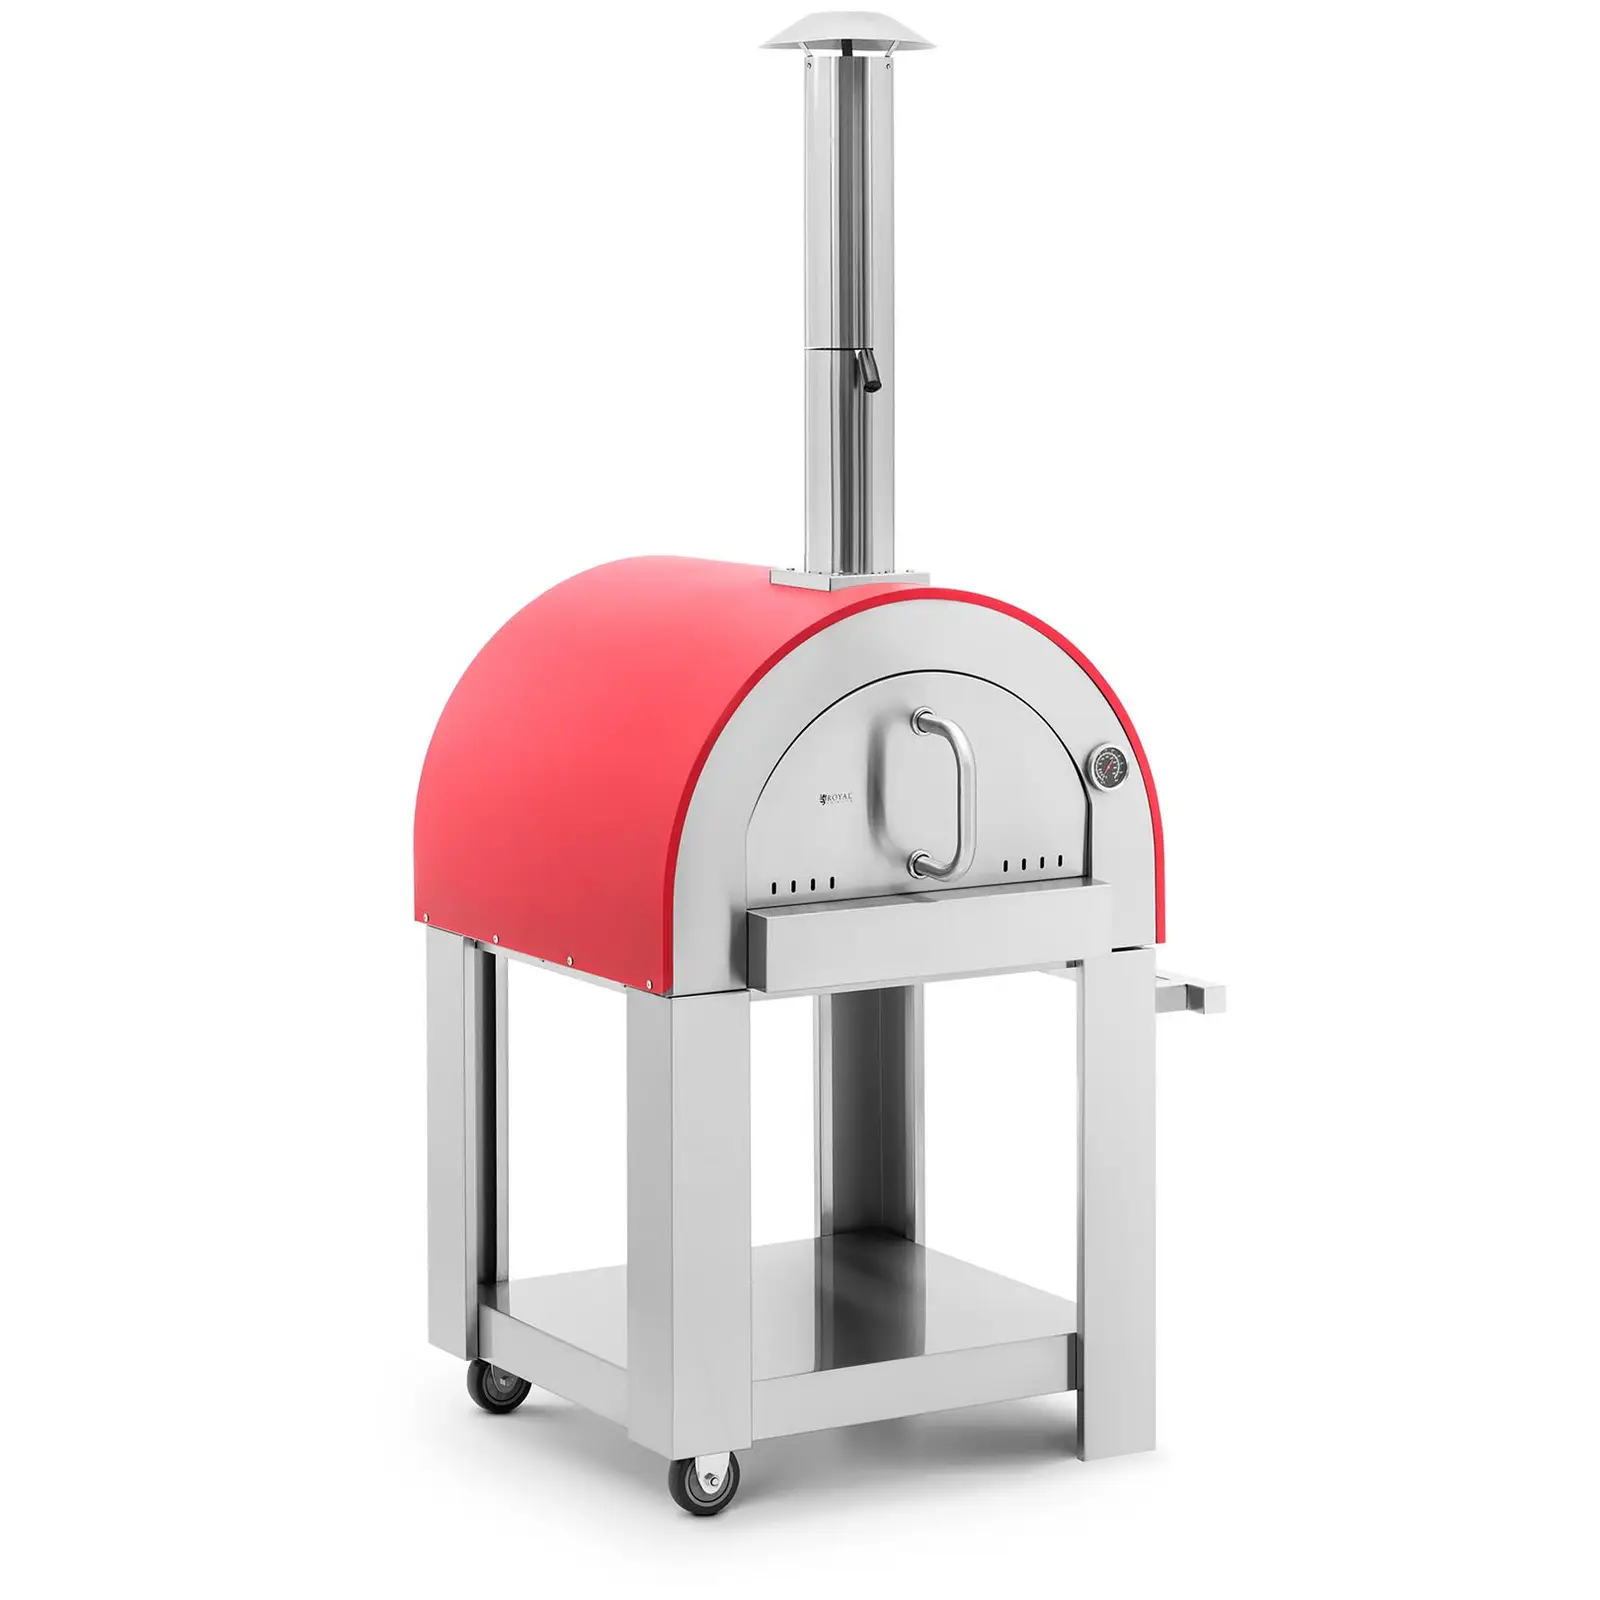 Wood Fired Pizza Oven - clay plate - 500 ° C - Ø 40.5 cm - Royal Catering